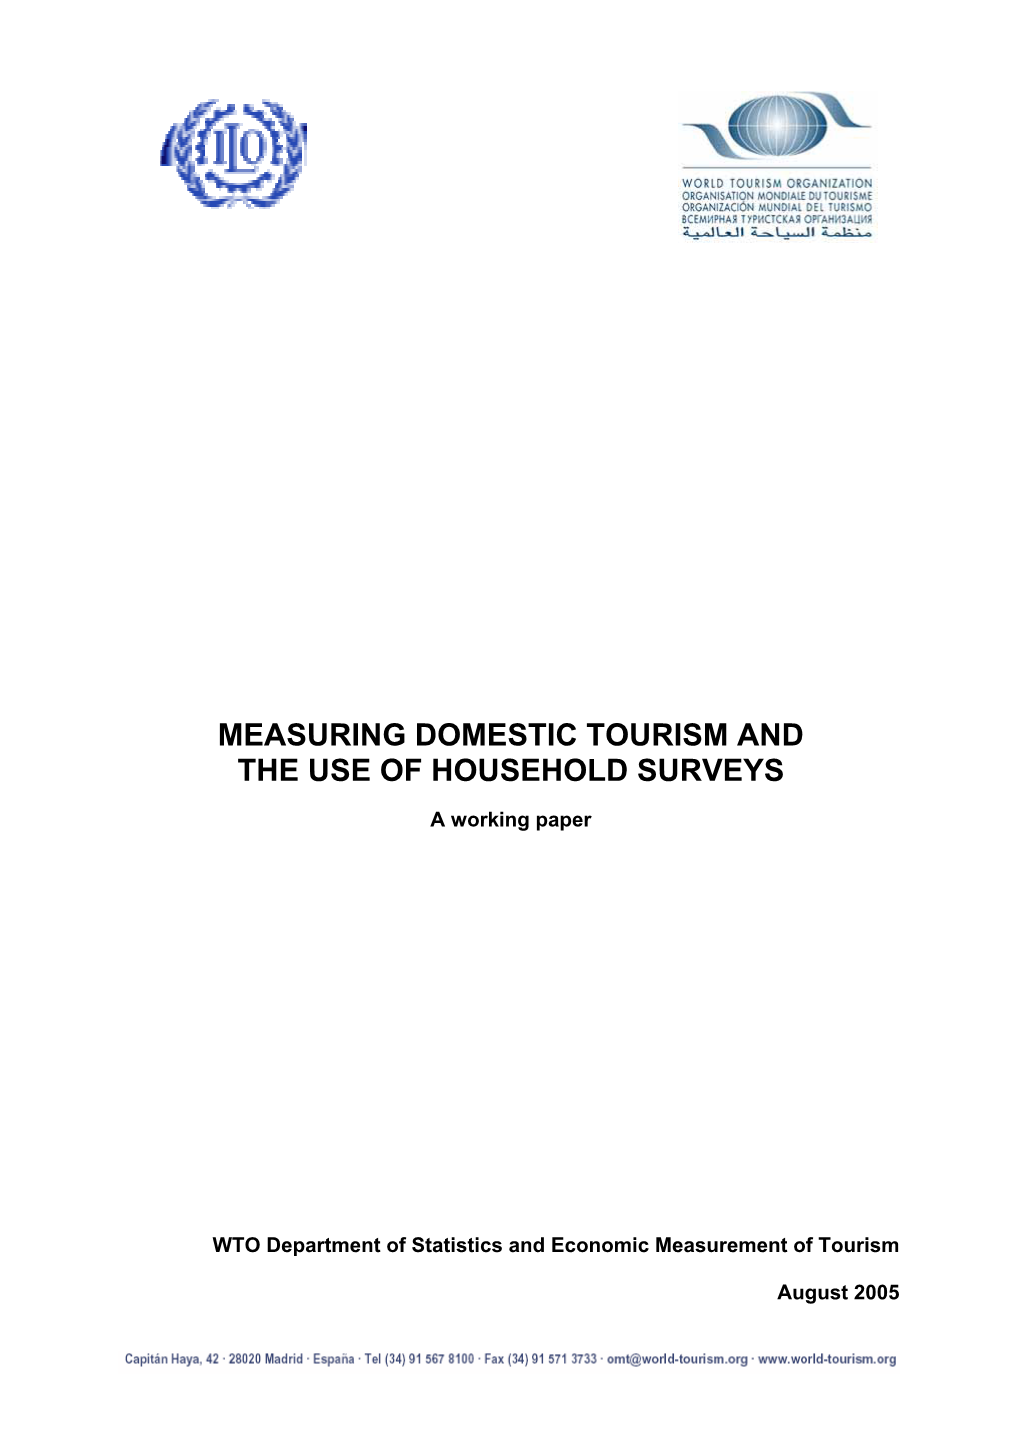 Measuring Domestic Tourism and the Use of Household Surveys